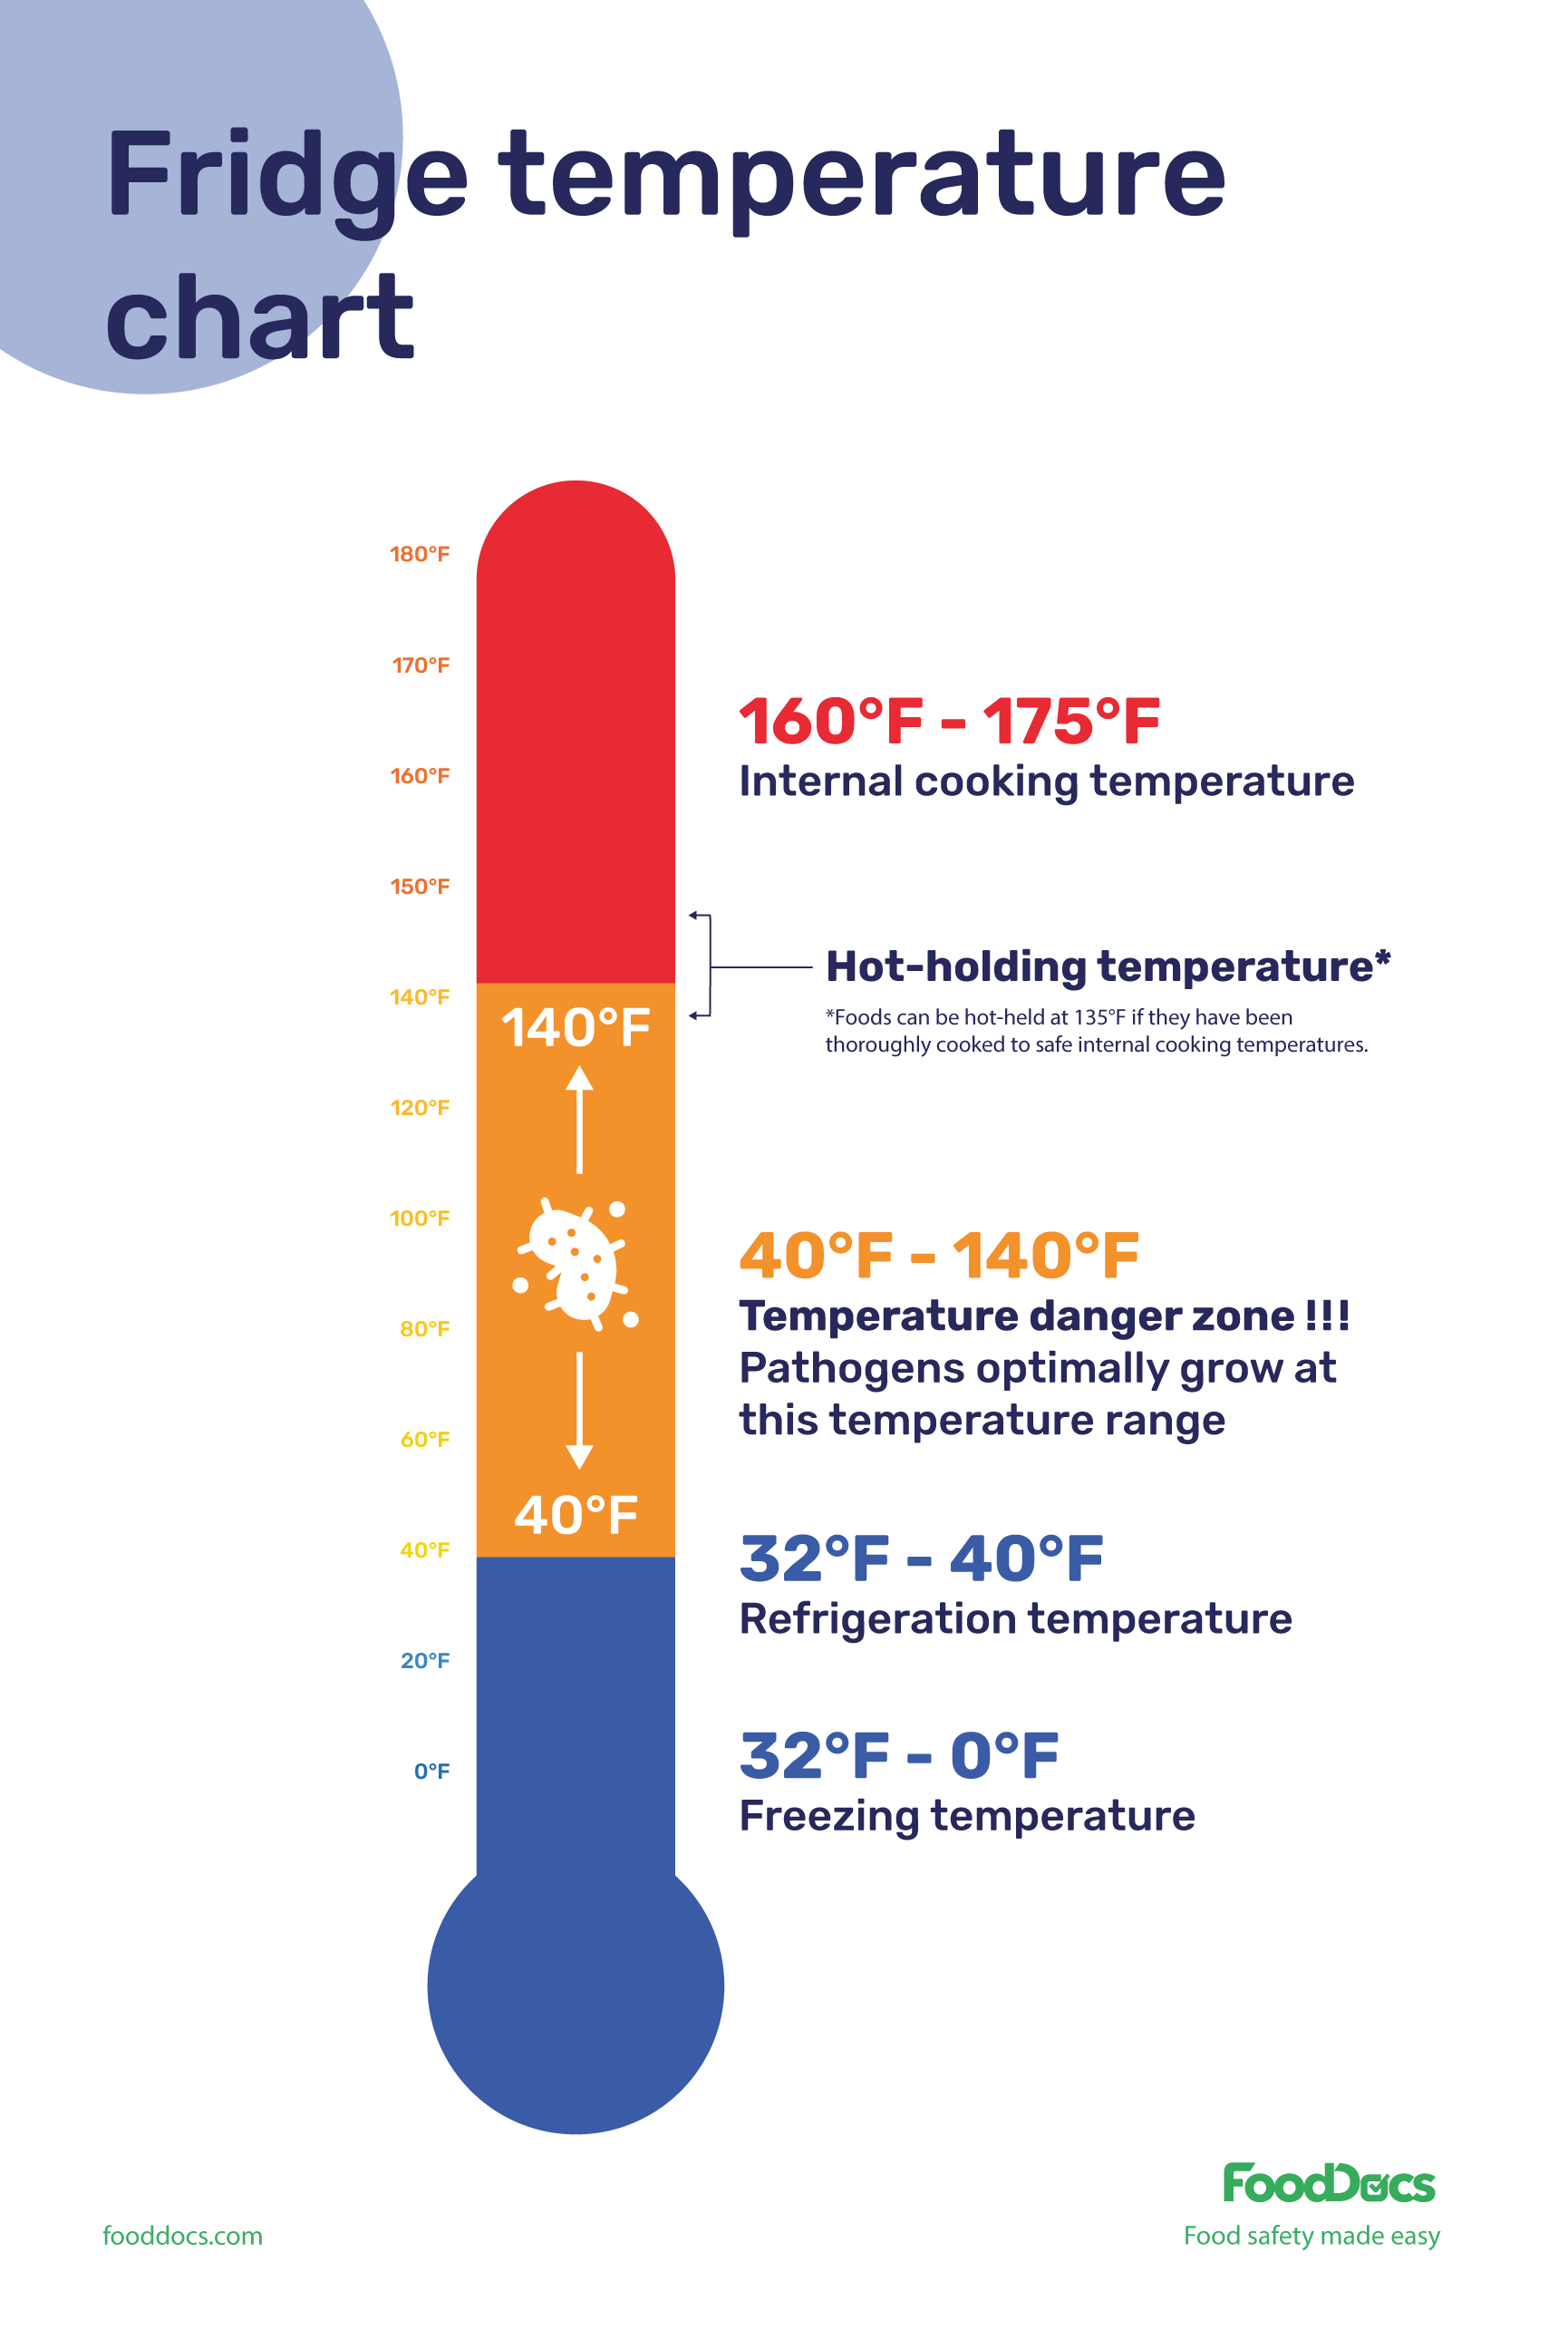 Grilling Time and Temperature Chart - The Flexible Fridge